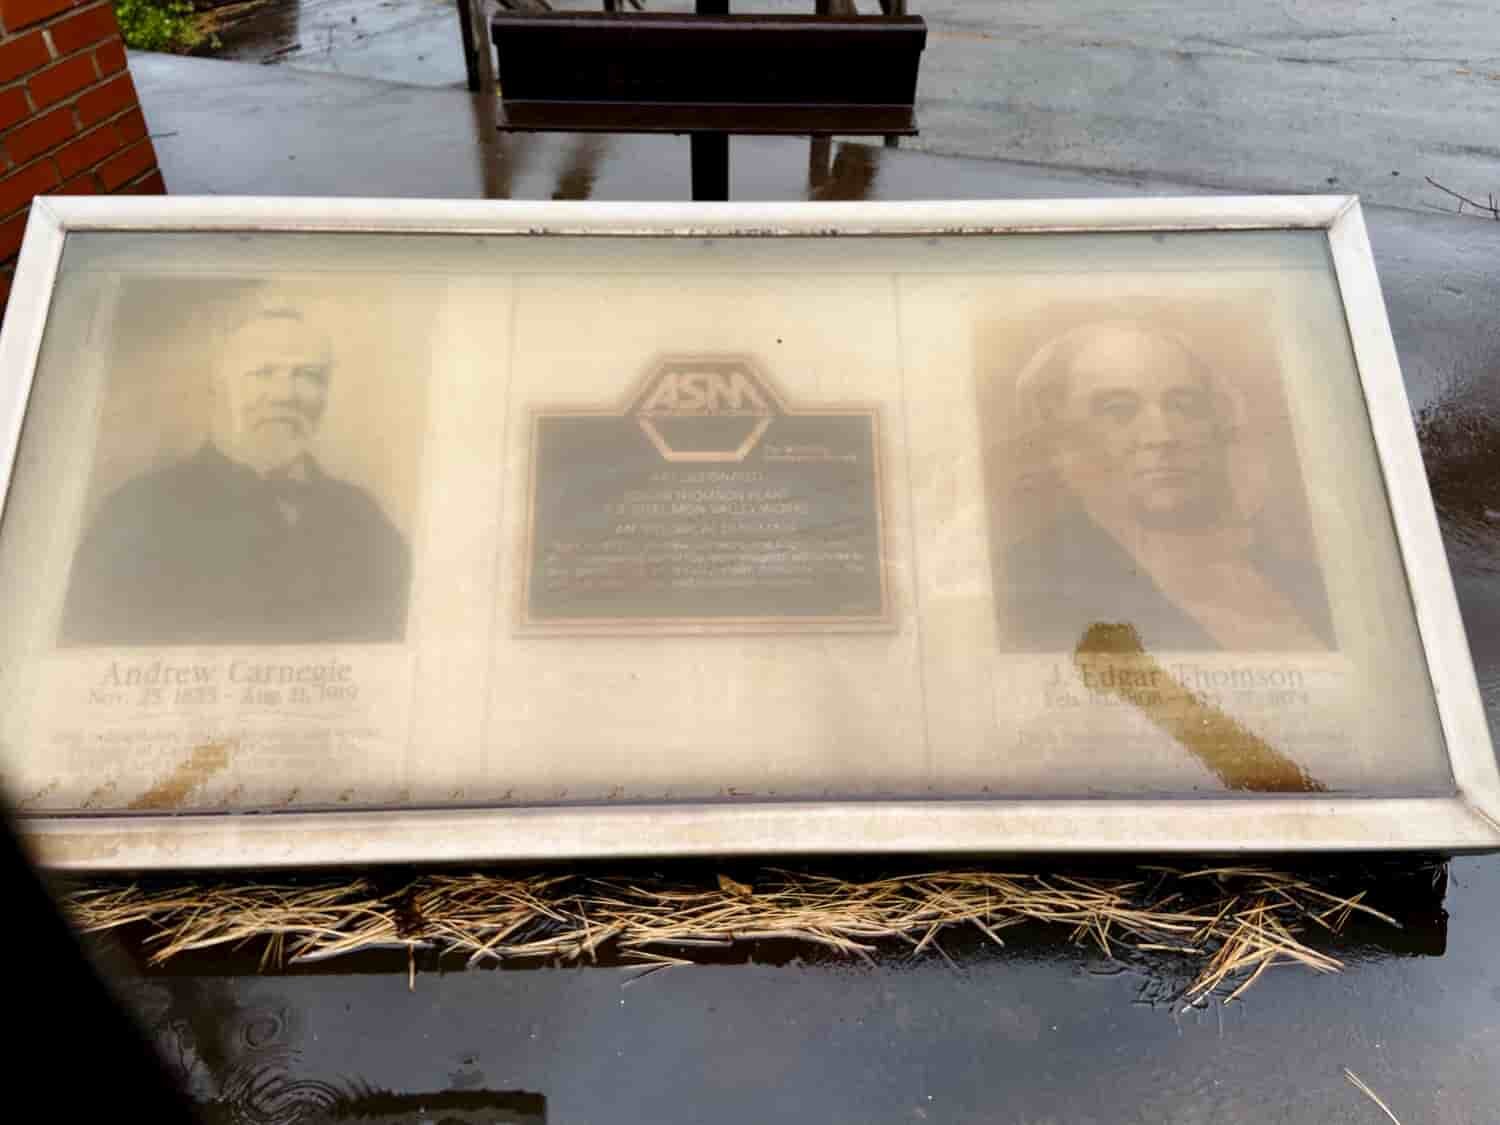  A plaque in front of the steel mill, dedicated to Andrew Carnegie and J. Edgar Thomson, is covered in soot. 